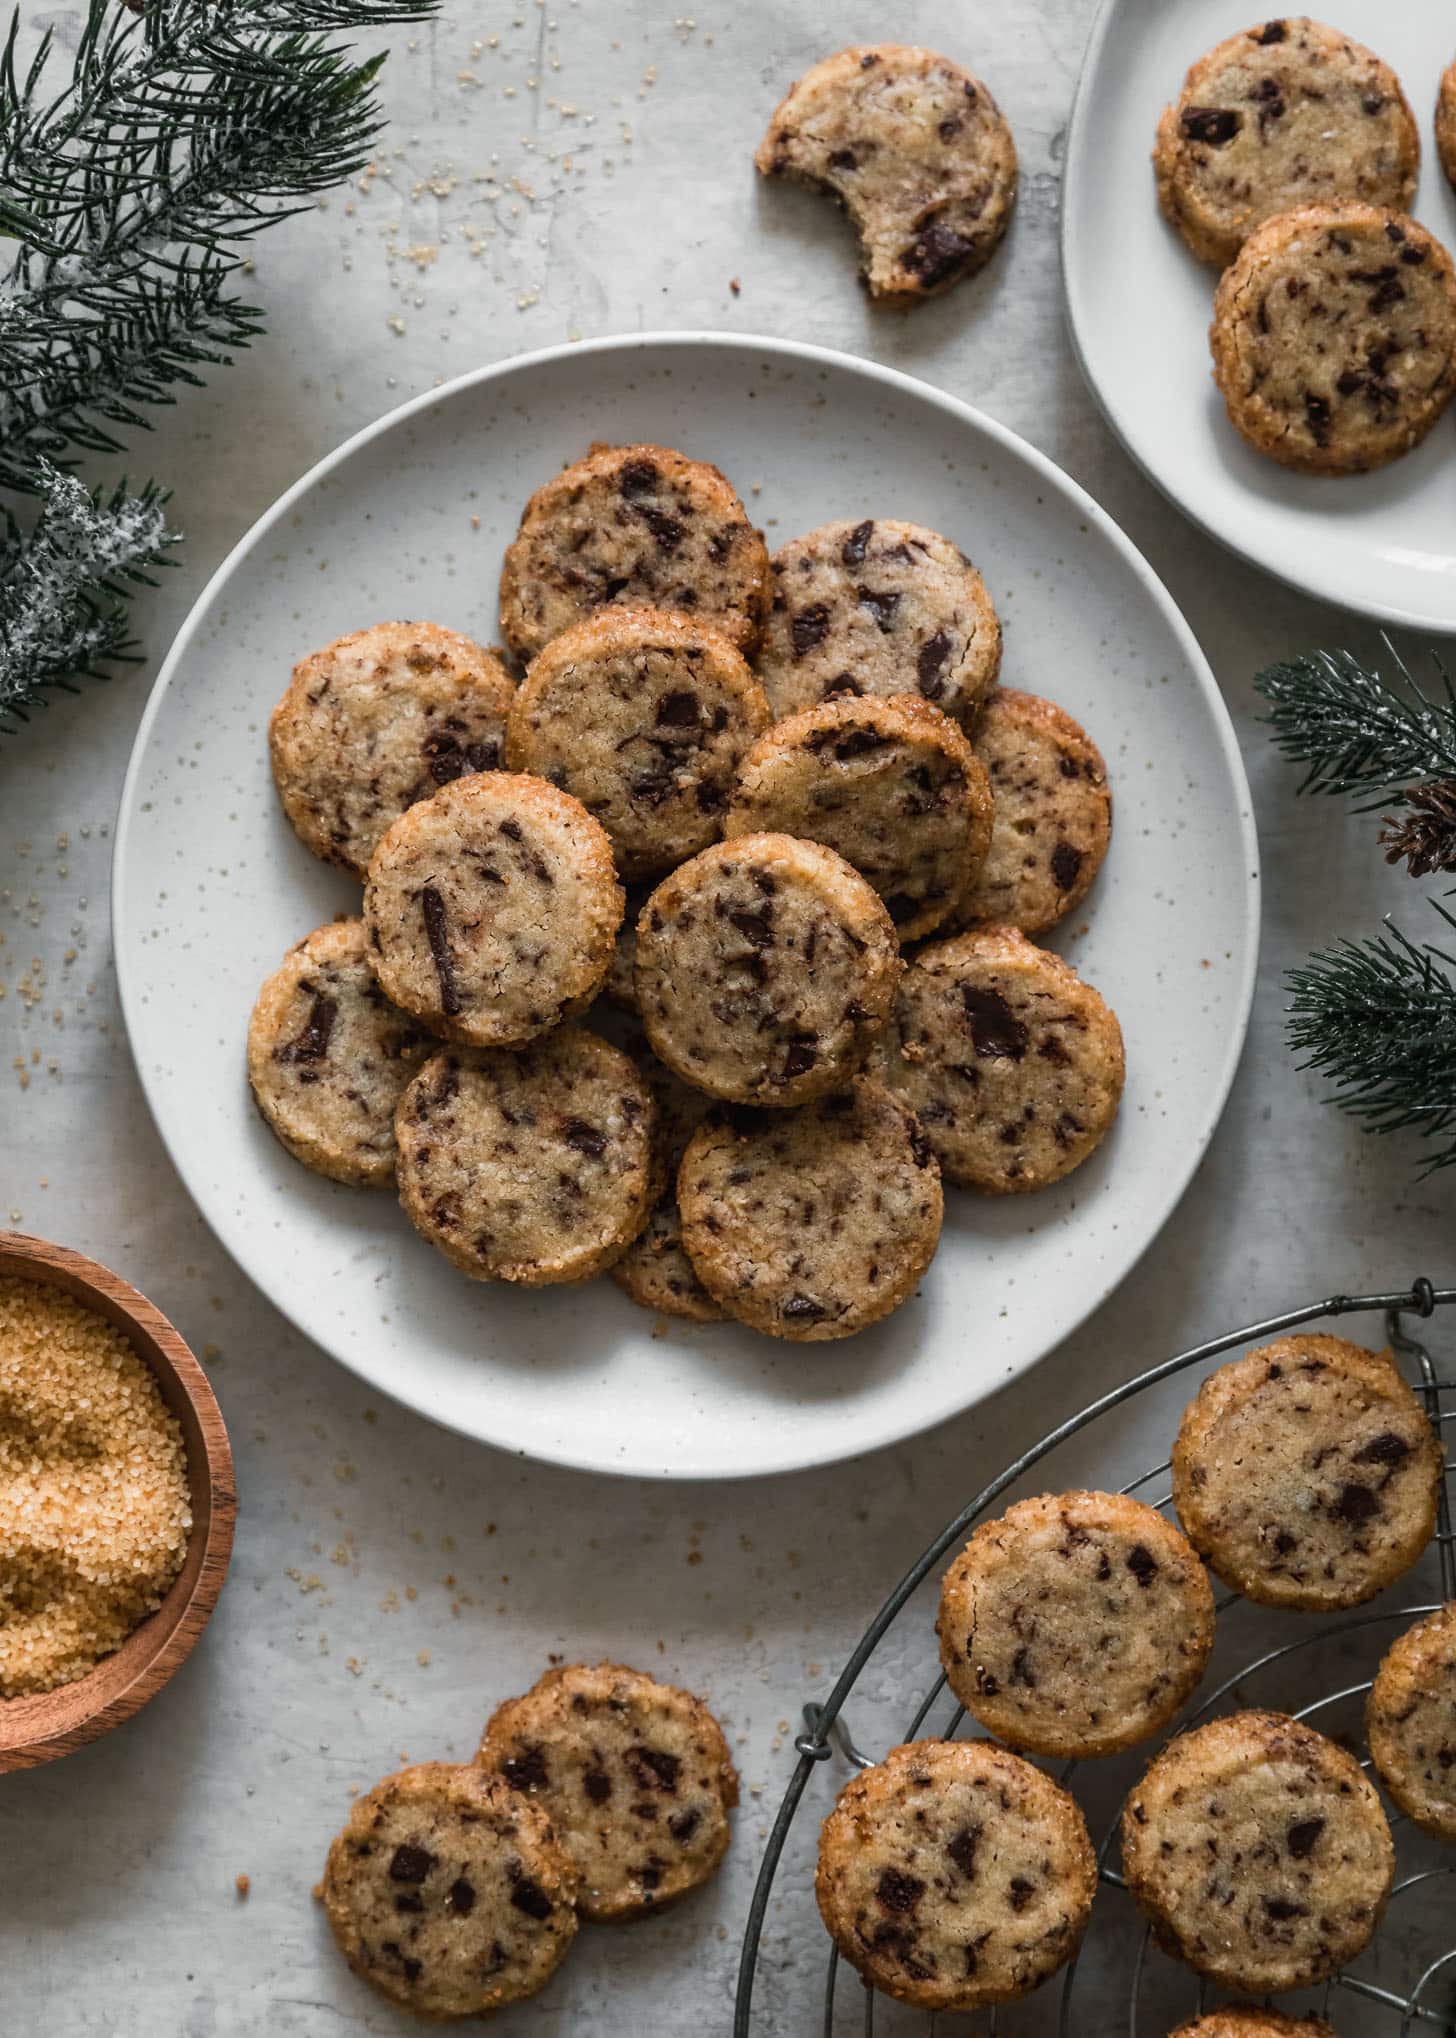 A white plate of cardamom chocolate chunk shortbread cookies next to a cooling rack, wood bowl of Turbinado sugar, and garland on a grey counter.